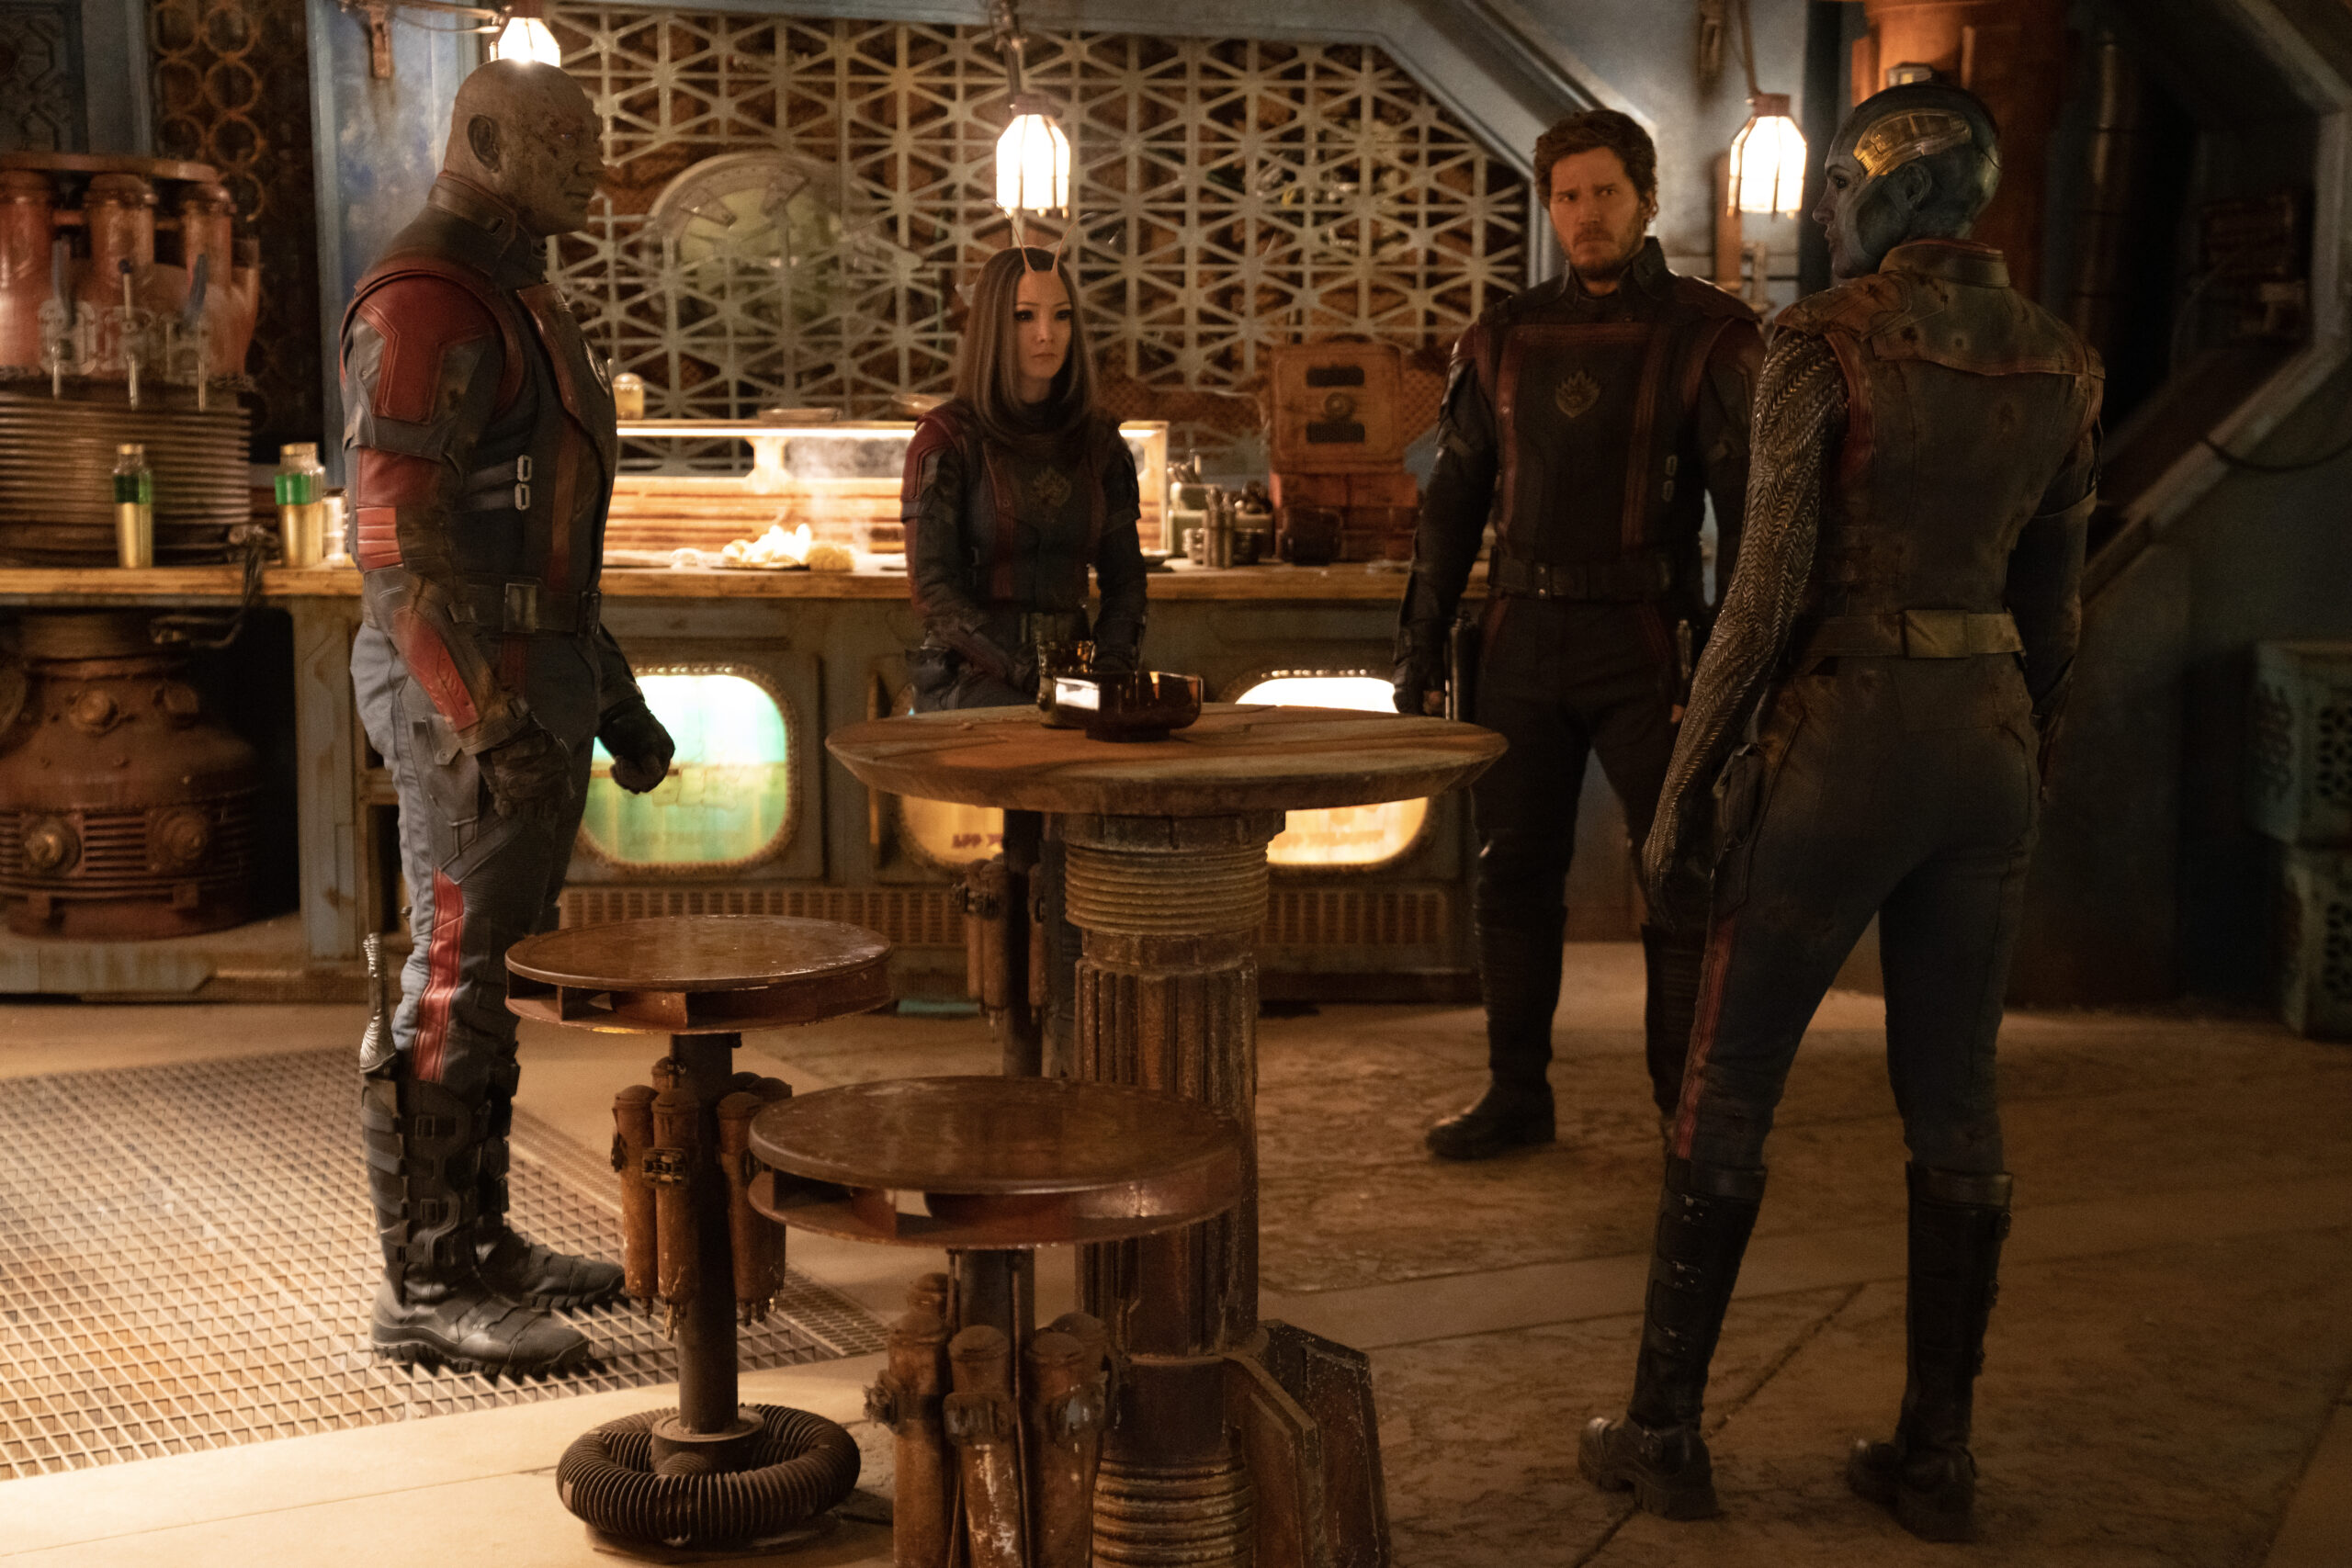 (L-R): Dave Bautista as Drax, Pom Klementieff as Mantis, Chris Pratt as Peter Quill/Star-Lord, and Karen Gillan as Nebula in Marvel Studios' Guardians of the Galaxy Vol. 3. Photo by Jessica Miglio. © 2022 MARVEL.